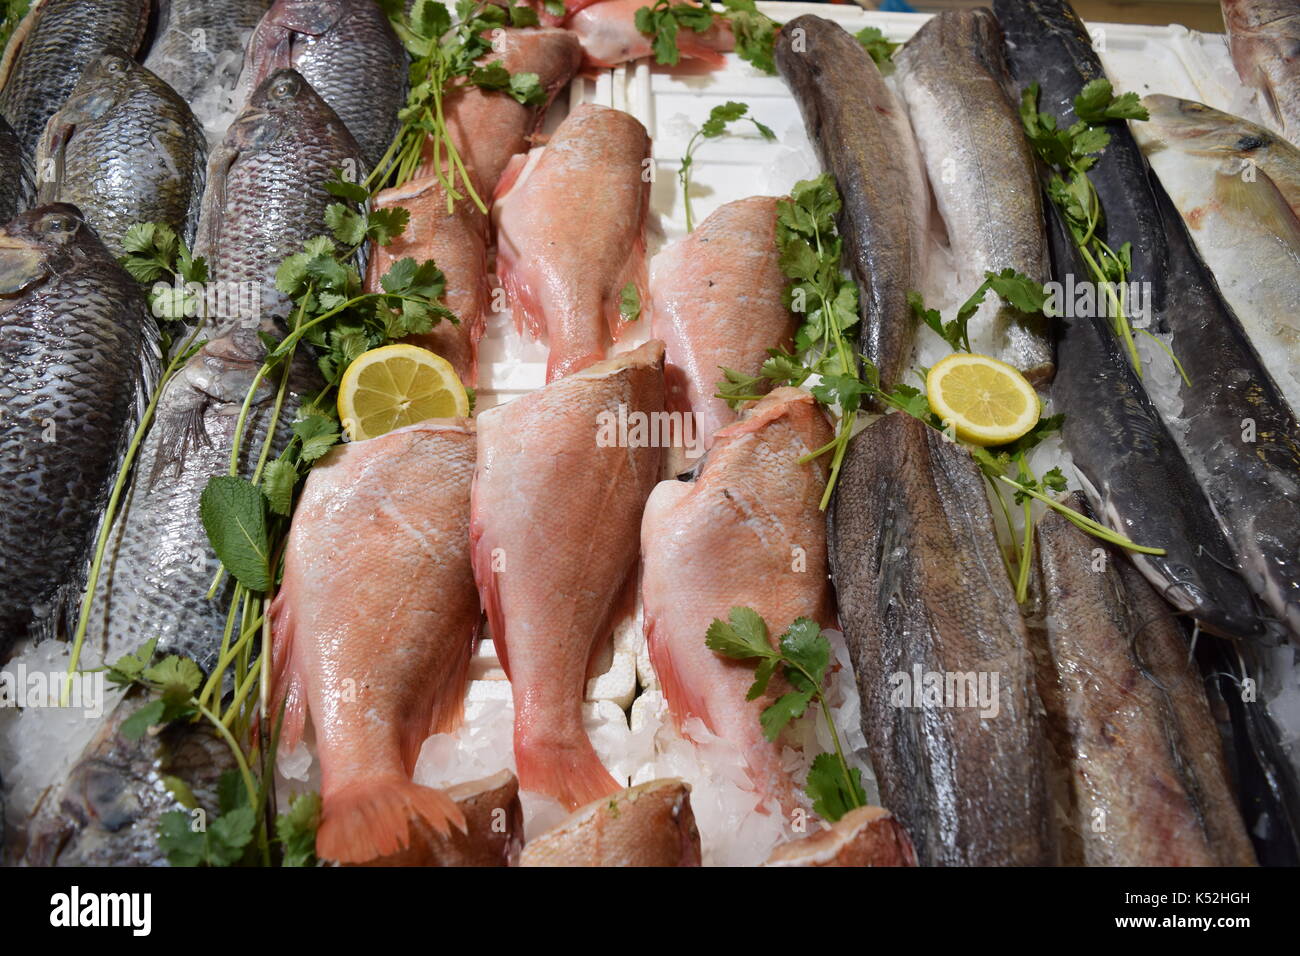 Uncooked varieties of fish on a market stall Stock Photo